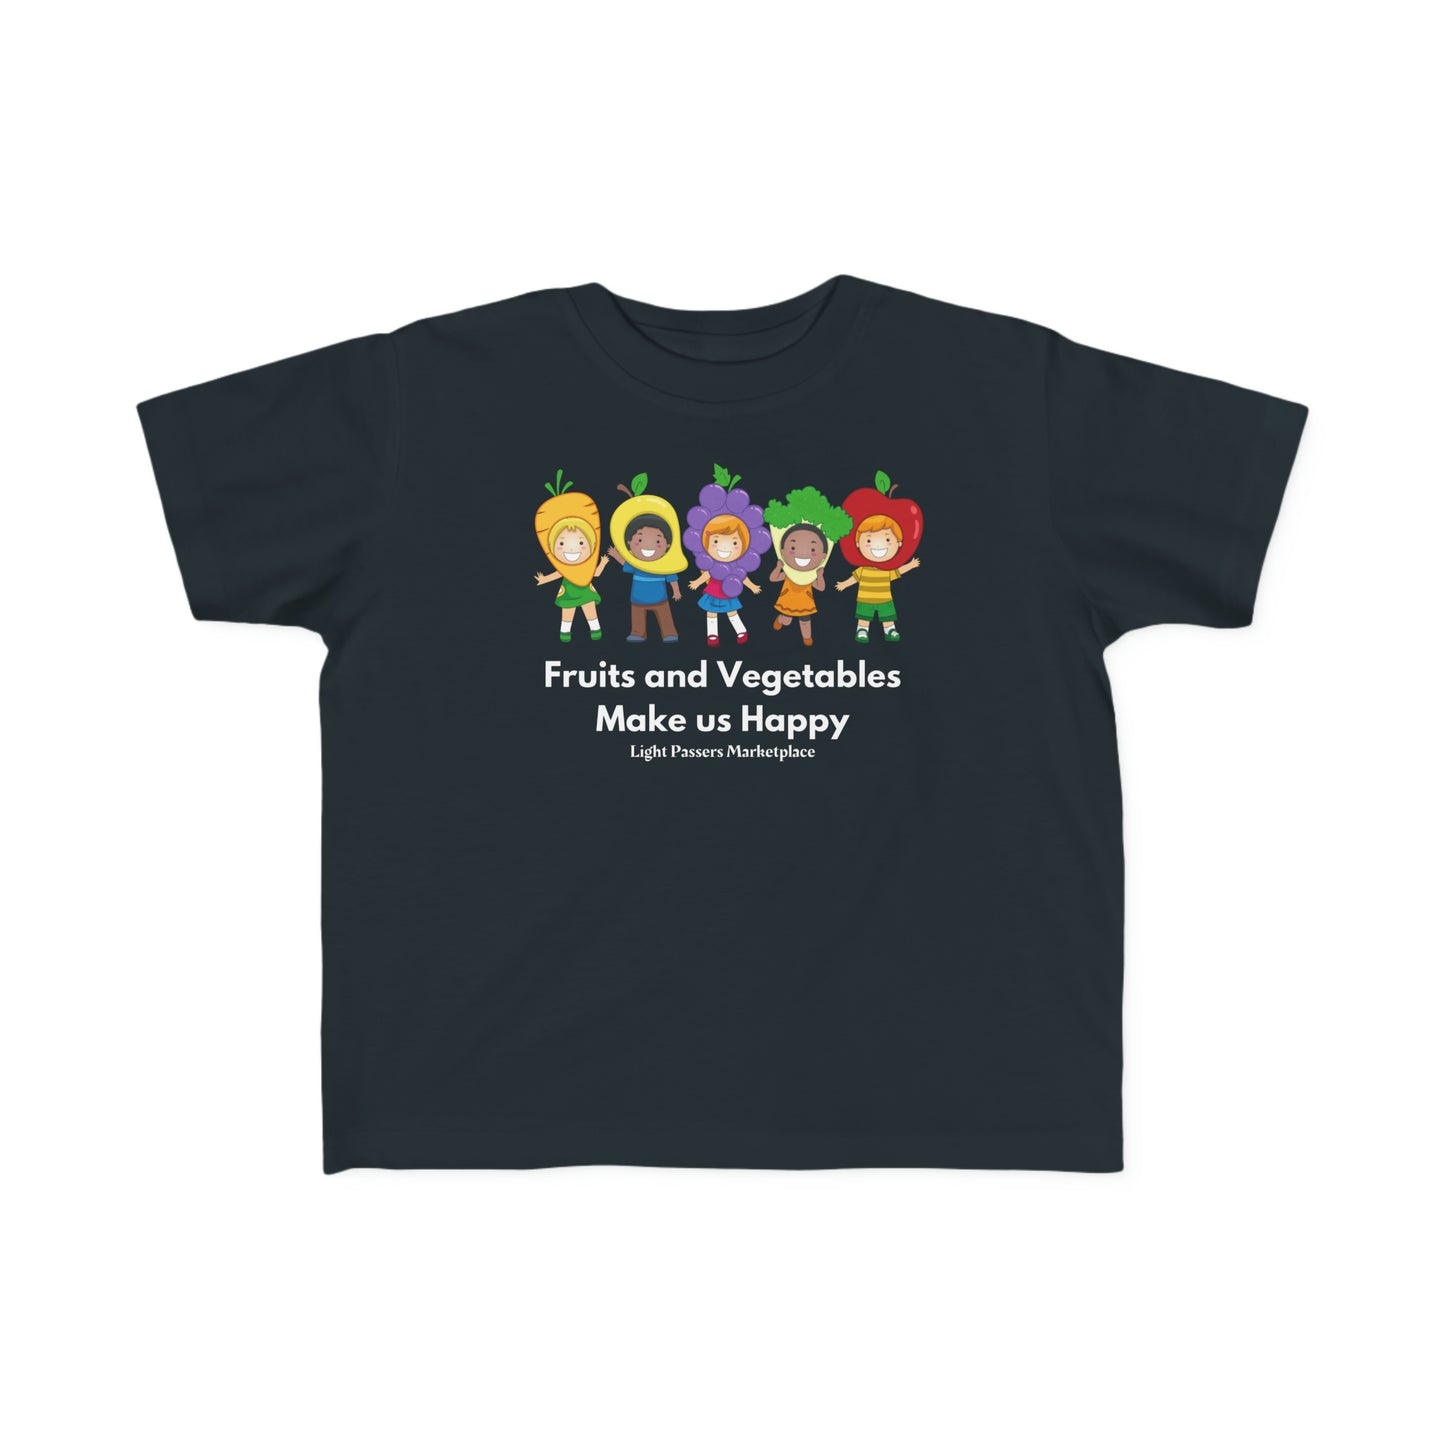 A black toddler t-shirt featuring cartoon characters like kids in fruit clothing. Made of soft, 100% combed cotton, with a durable print, perfect for sensitive skin. Classic fit, tear-away label, and true to size.